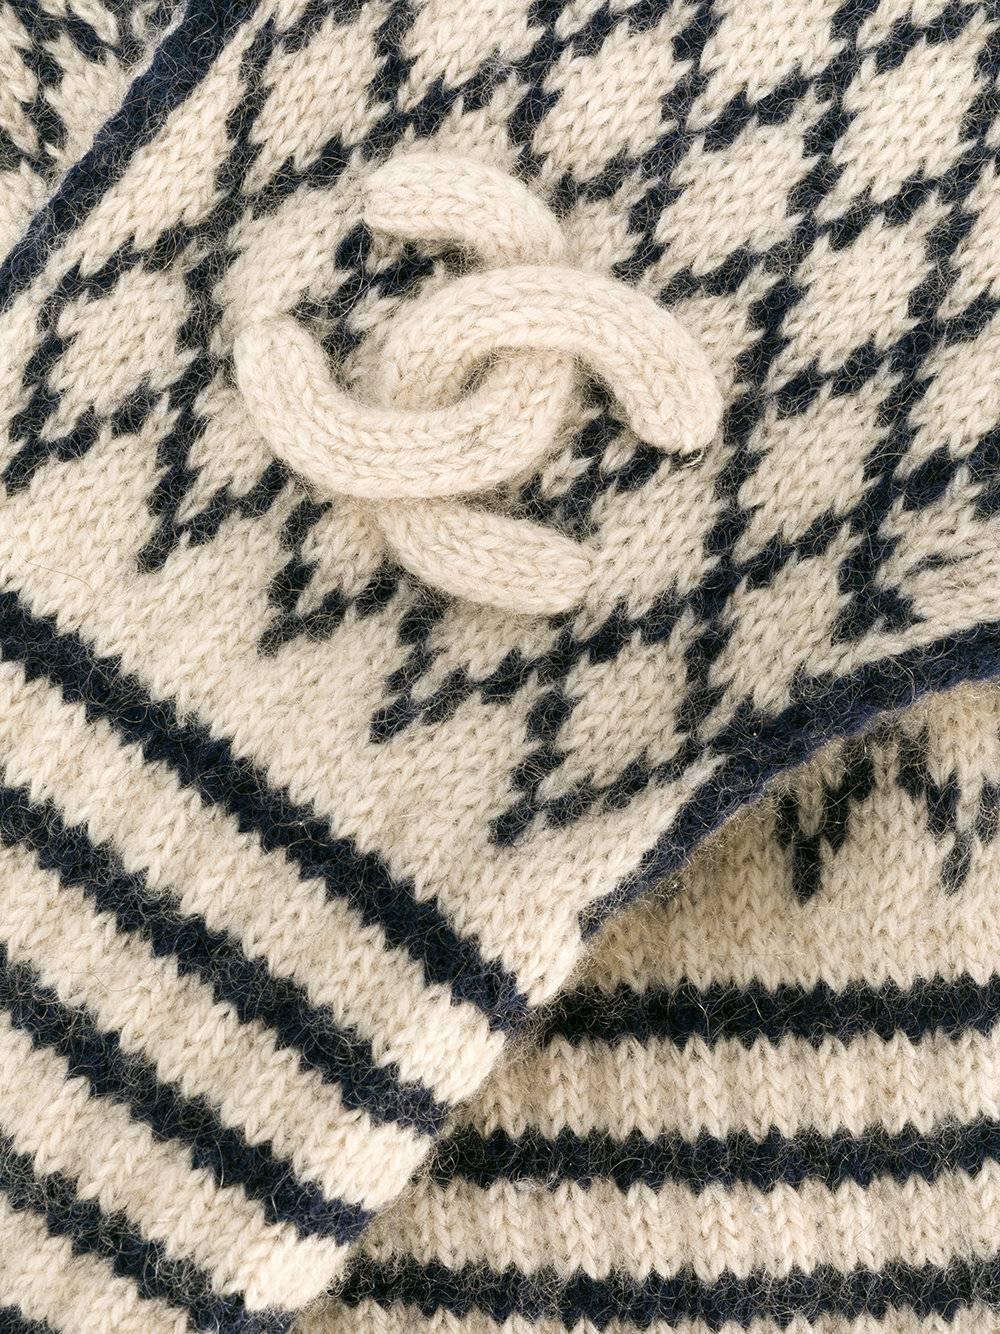 Crafted in the United Kingdom, these mittens were fashioned from pure delicate knitted cashmere. They feature elasticated cuffs, a geometric pattern and a knitted interlocking CC patch.

Colour: Cream & Navy

Composition: Cashmere

Condition: 8/10